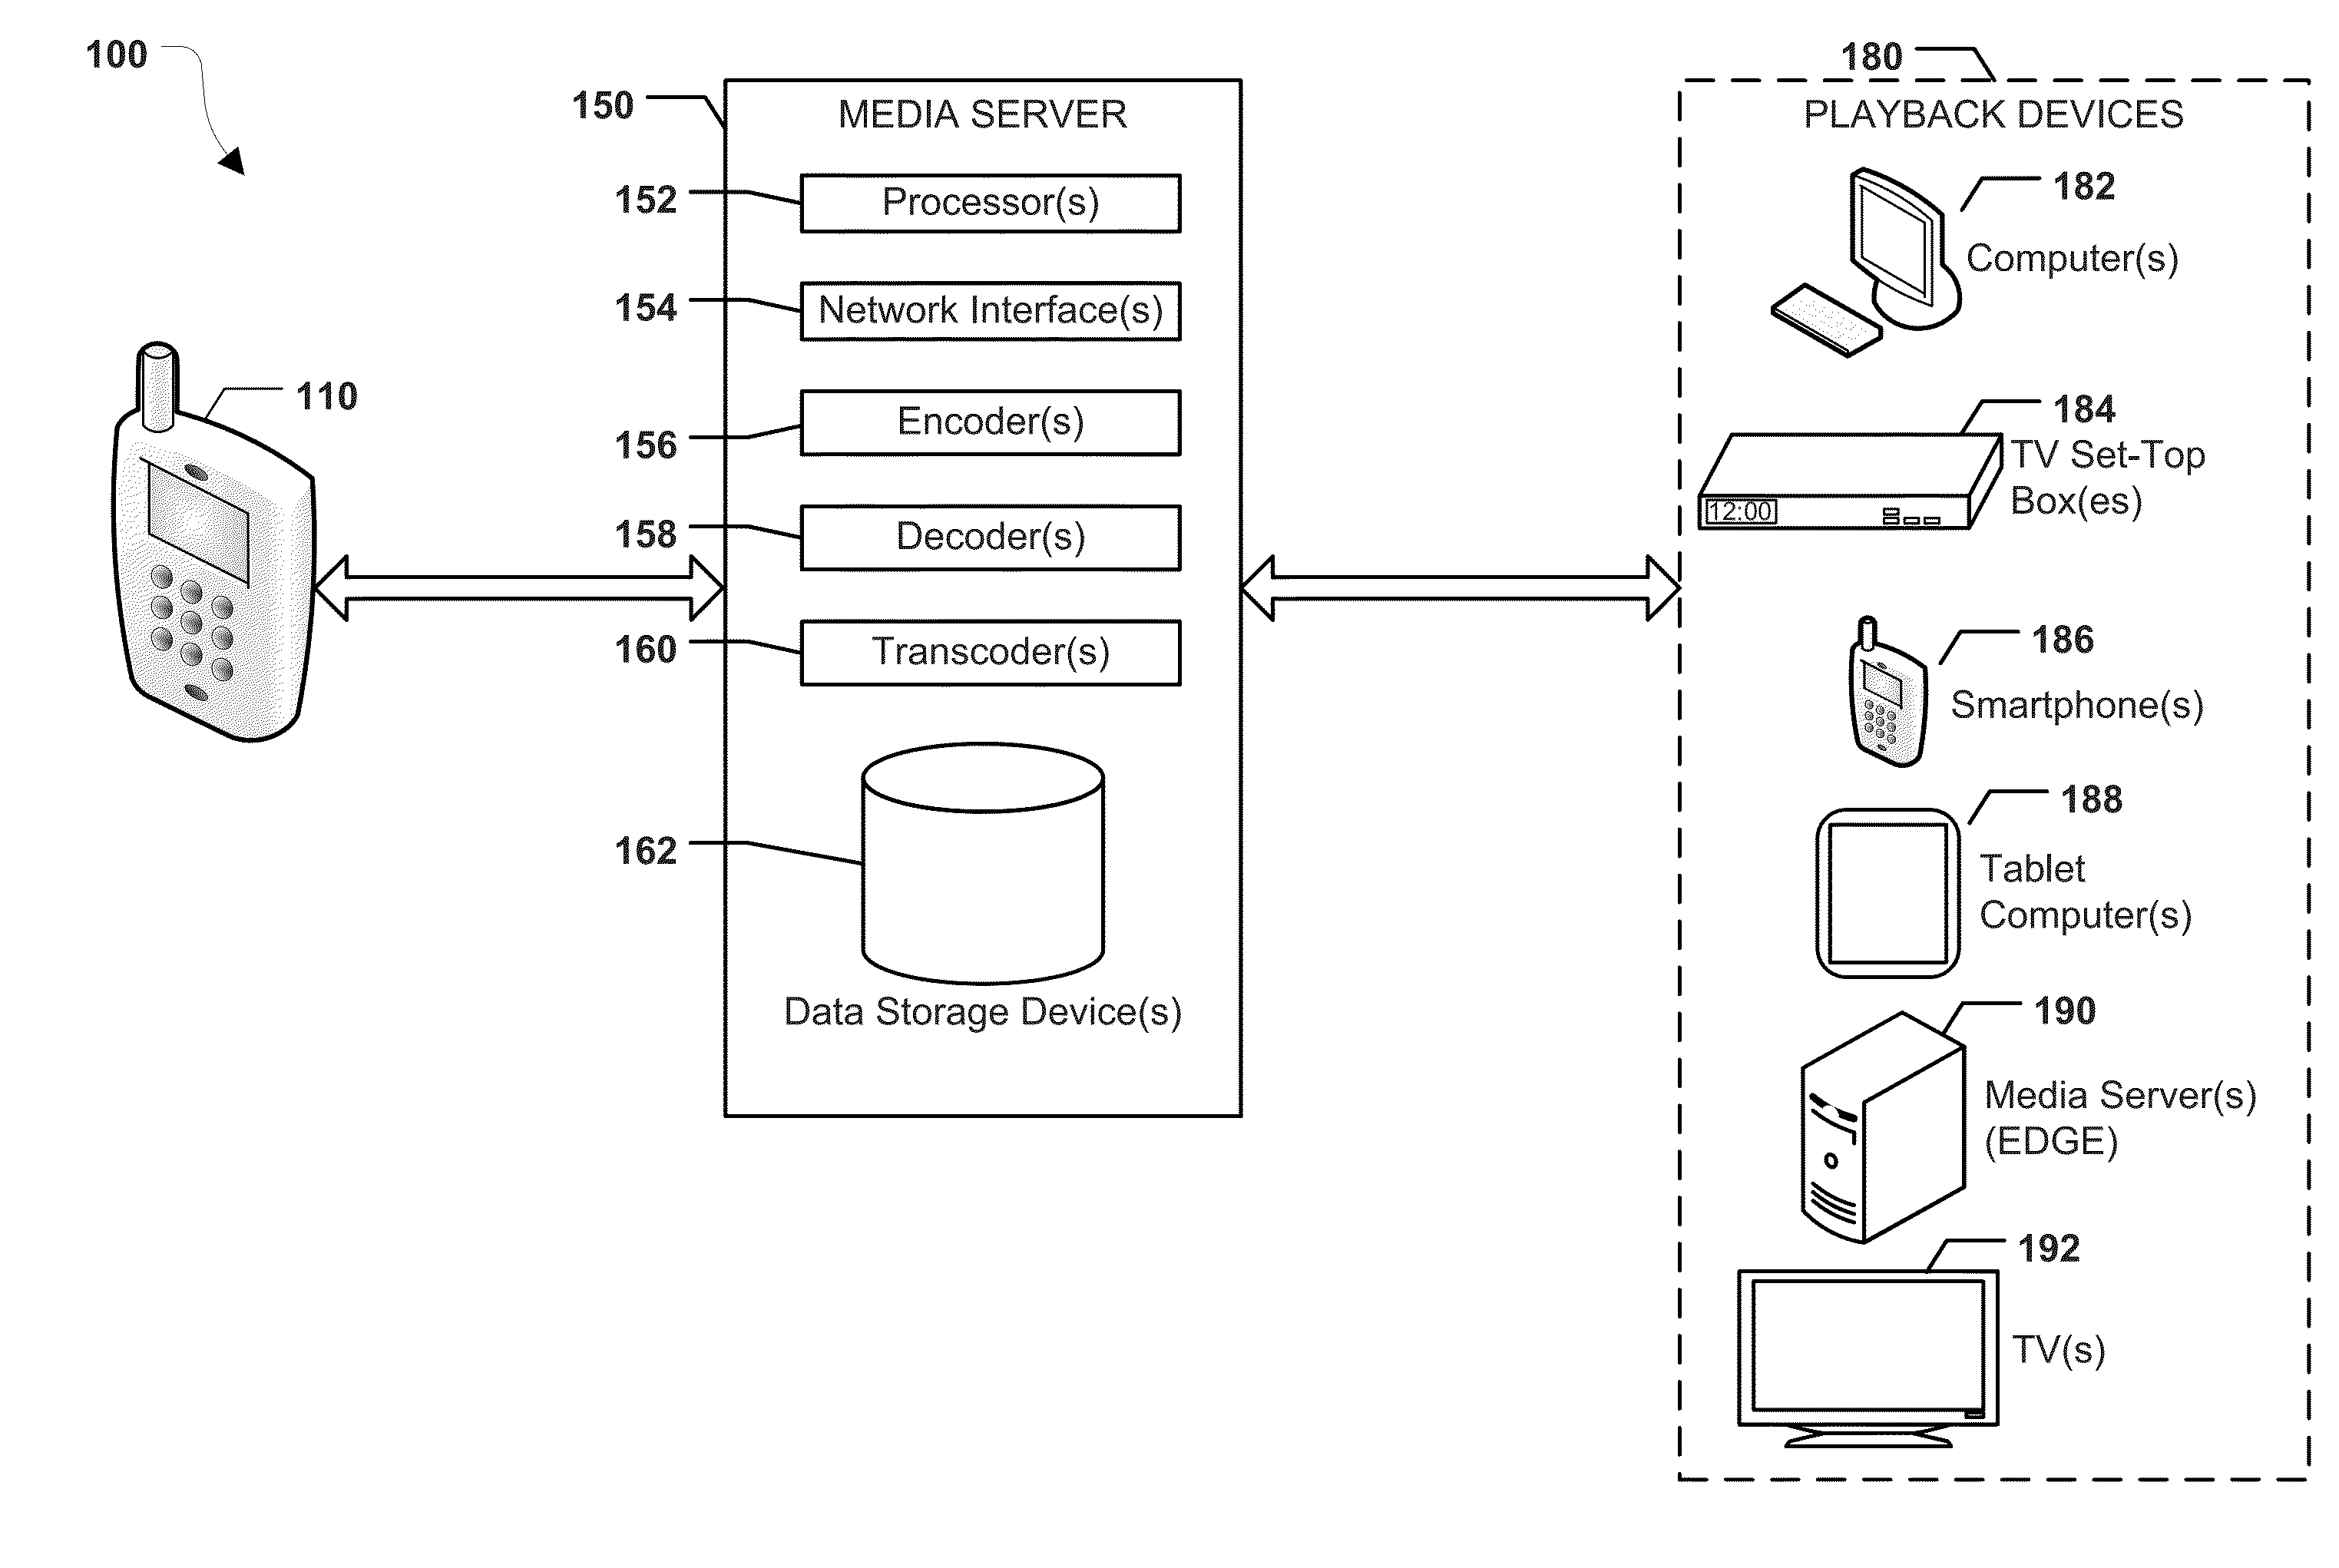 Adjusting encoding parameters at a mobile device based on a change in available network bandwidth